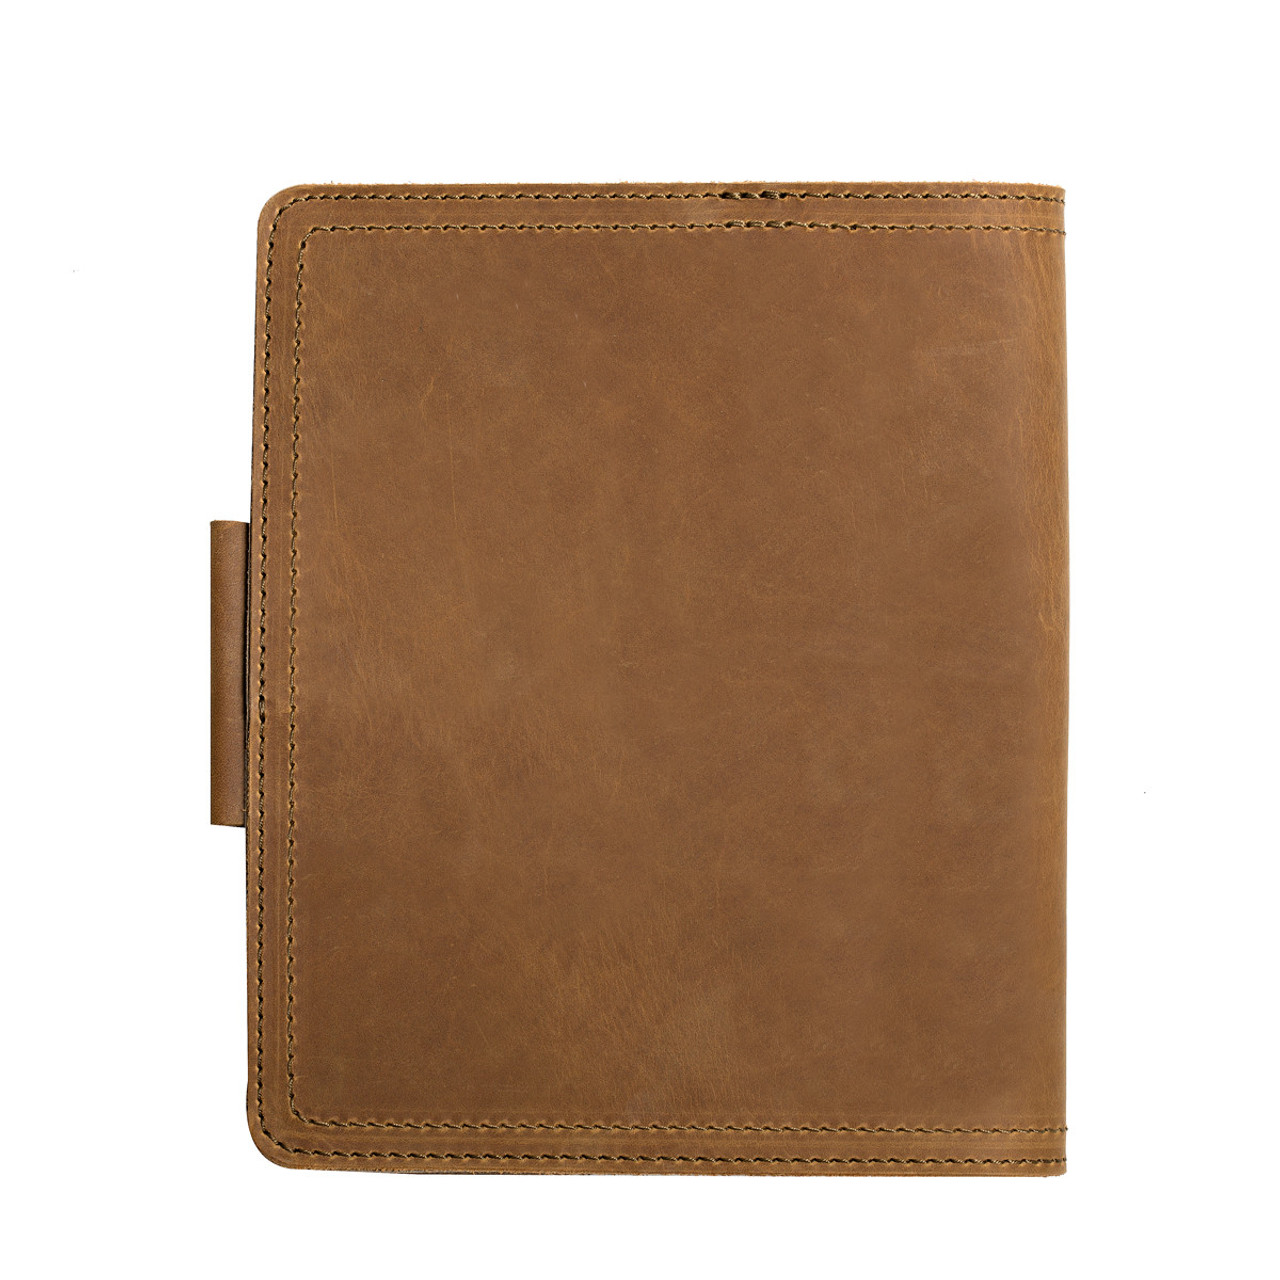 Single Extra Large Moleskine Cahier Leather Cover / Old Church Works -  Leather Notebook Covers - Leather Notebook Covers for a5 Moleskine Journals  and Field Notes Notebooks